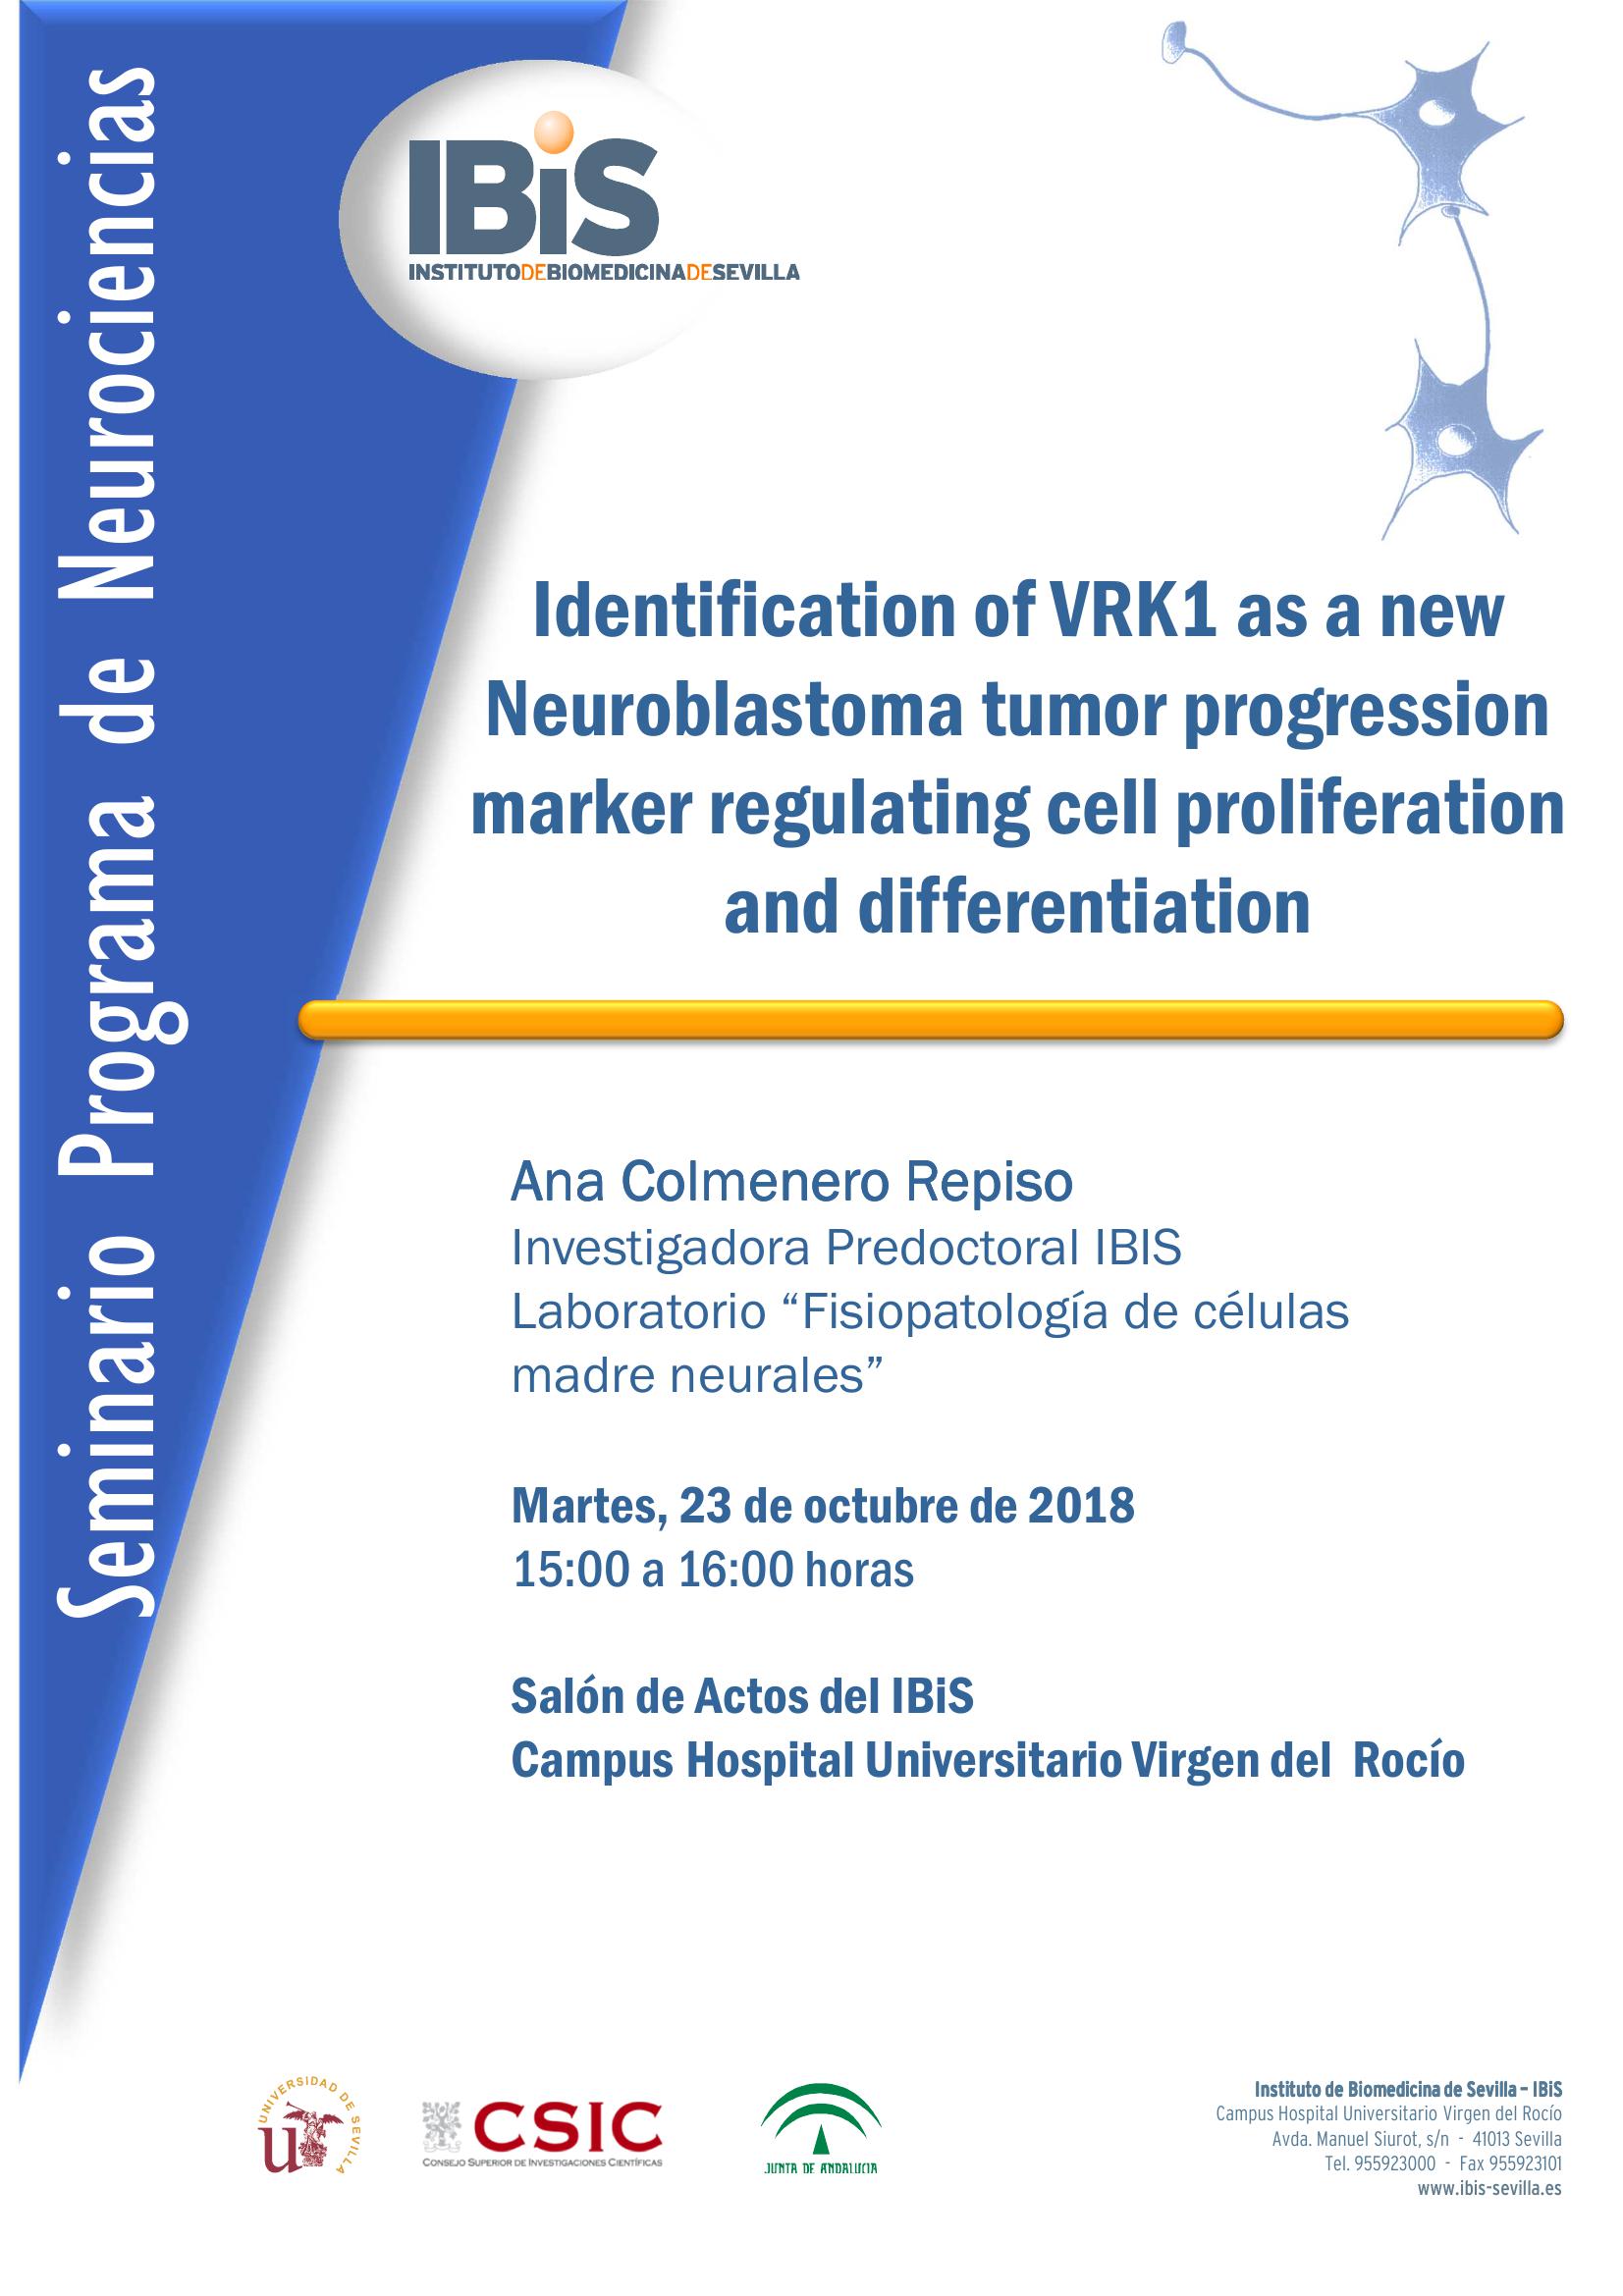 Poster: Identification of VRK1 as a new Neuroblastoma tumor progression marker regulating cell proliferation and differentiation